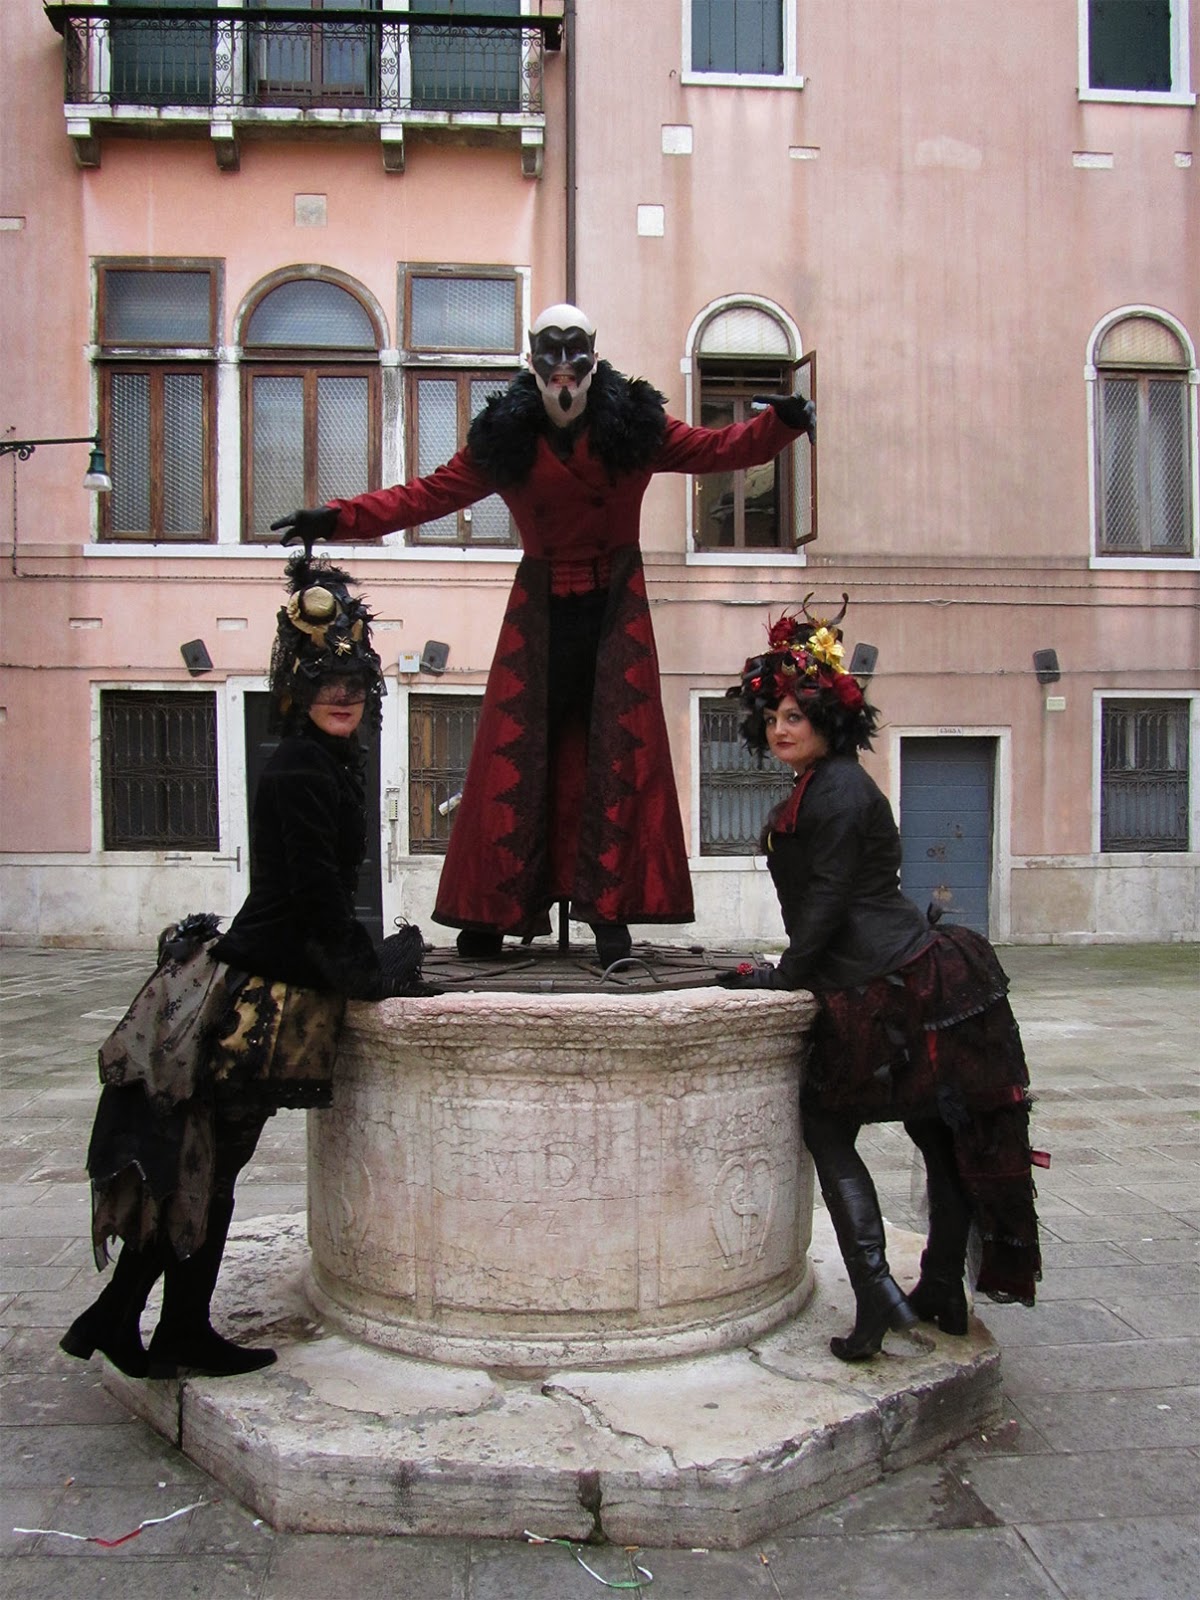 three devils on an old well